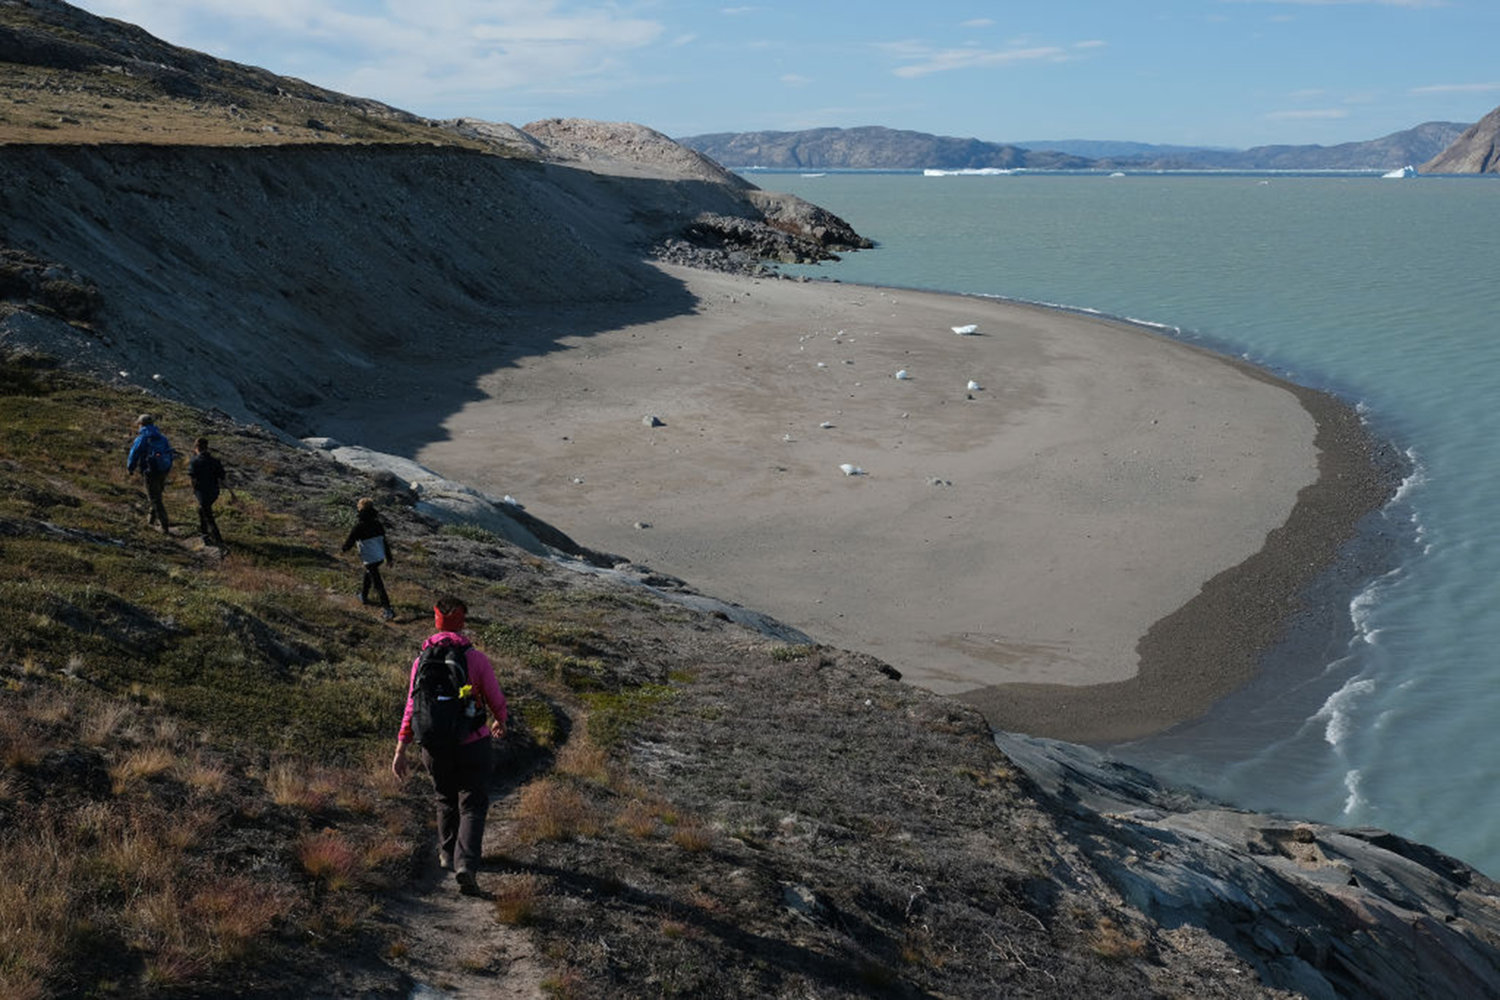 Hikers walk next to a beach shorn smooth by tsunamis resulting from ice crashing into water from the nearby Eqip Sermia glacier, also called the Eqi Glacier, on July 31, 2019 at Eqip Sermia, Greenland.